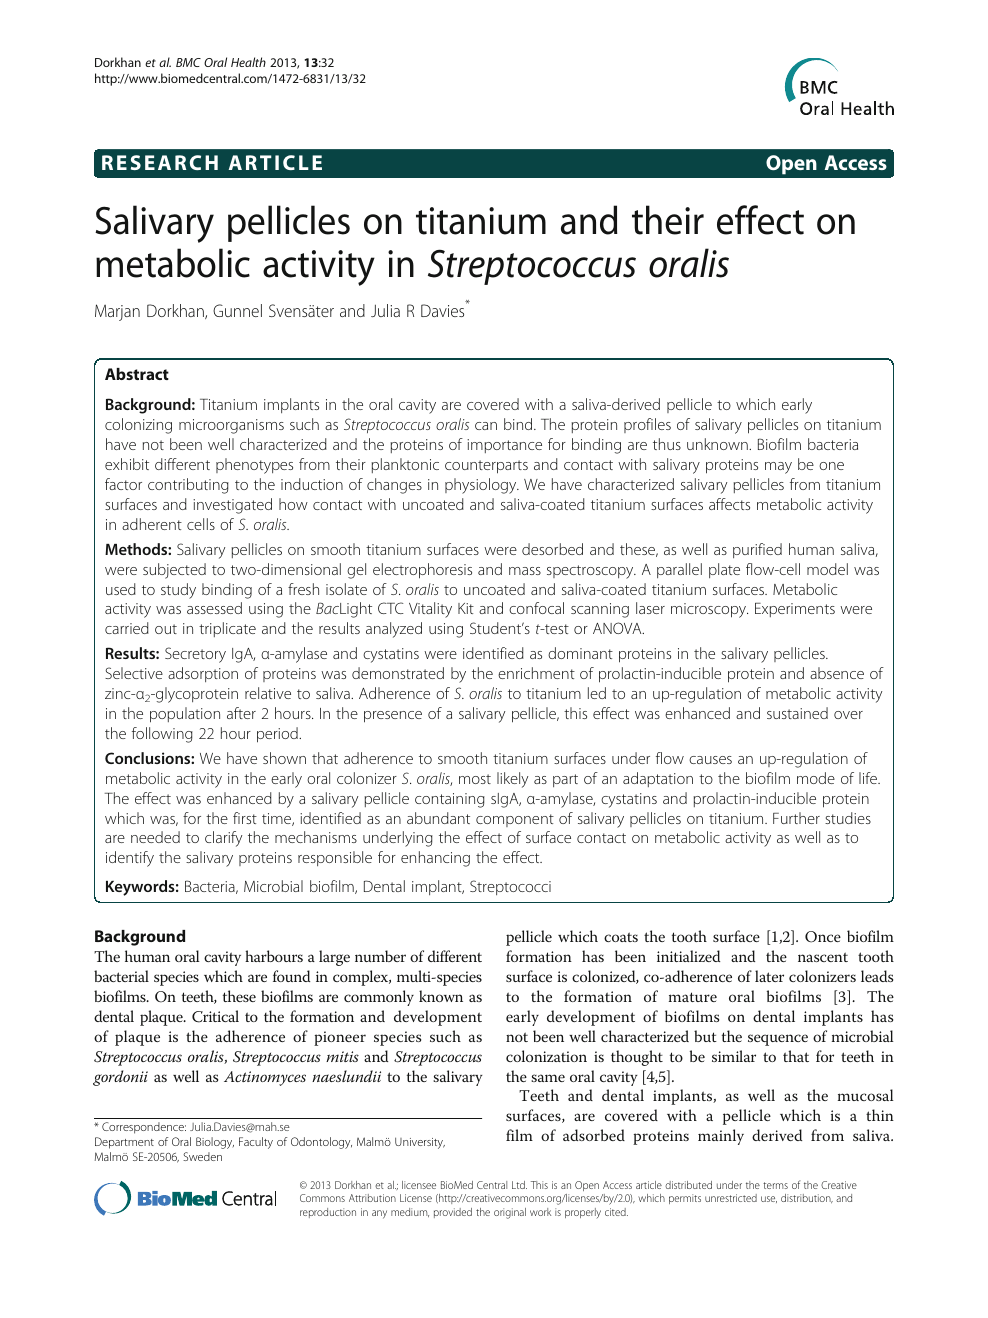 Salivary Pellicles On Titanium And Their Effect On Metabolic